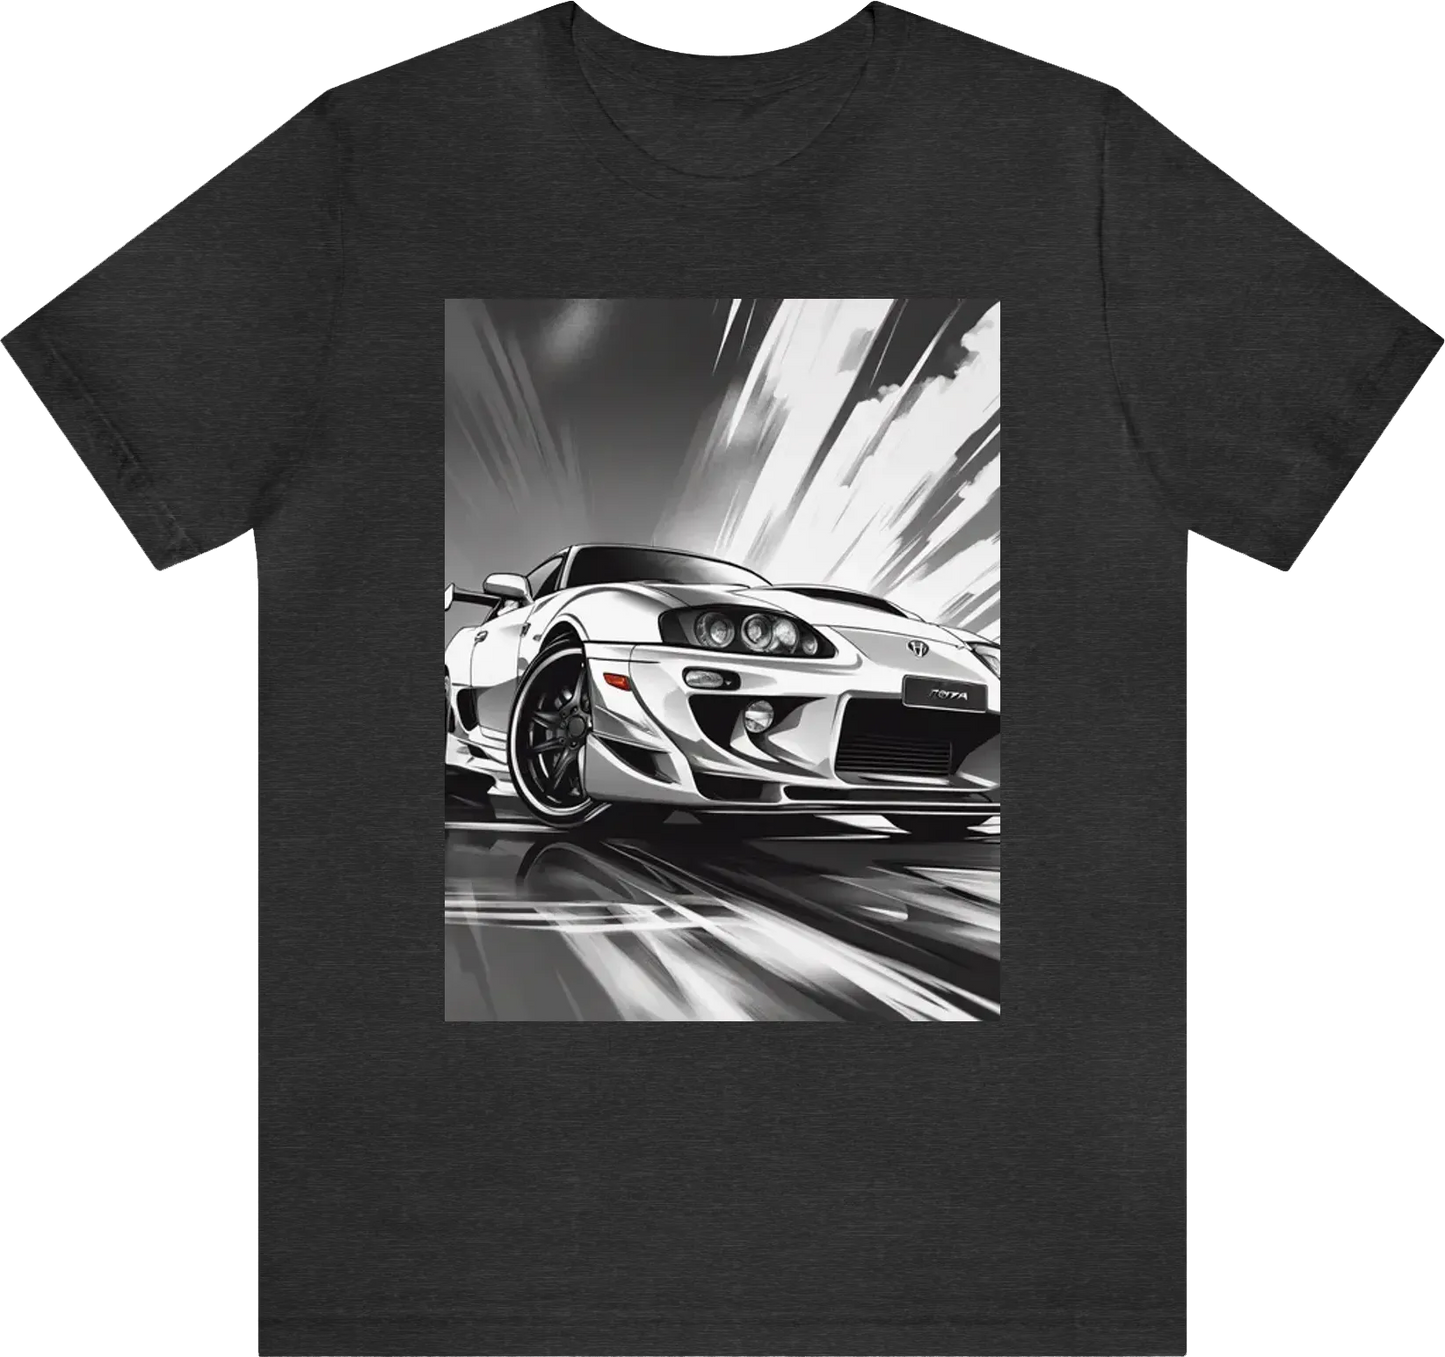 Toyota supra, cool illustration, view from below, black and white anime style